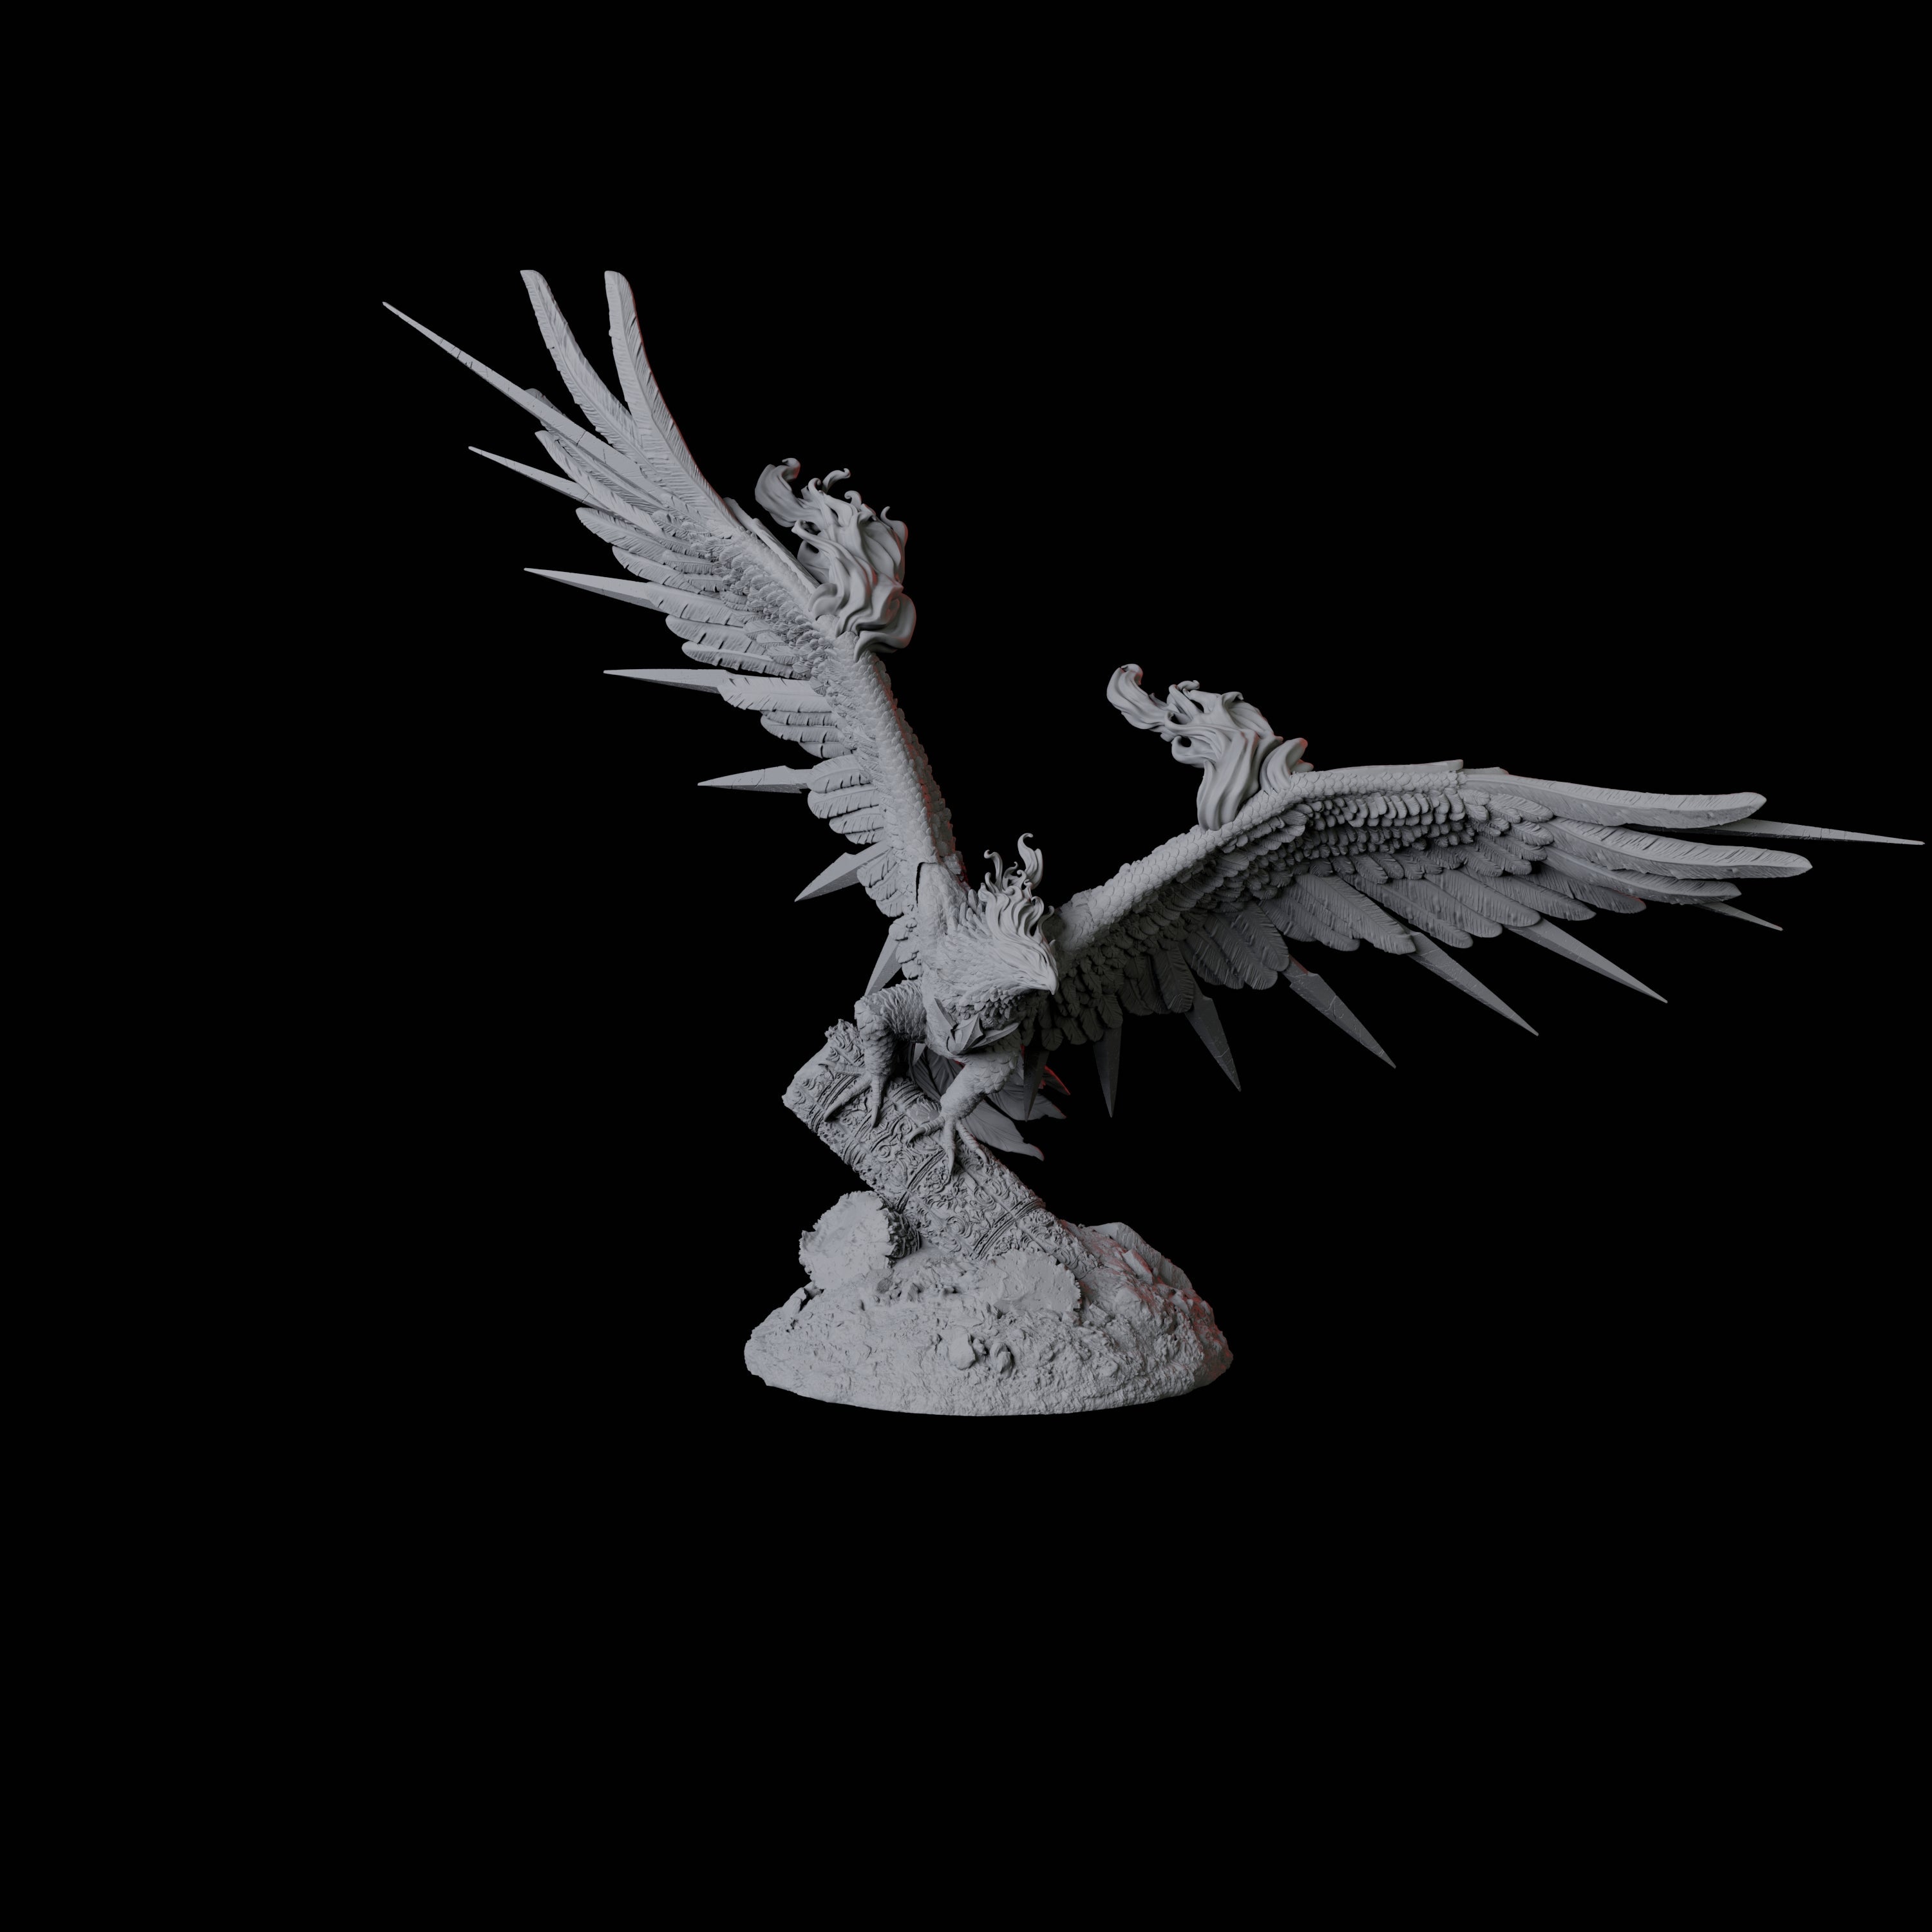 Fiery Phoenix B Miniature for Dungeons and Dragons, Pathfinder or other TTRPGs